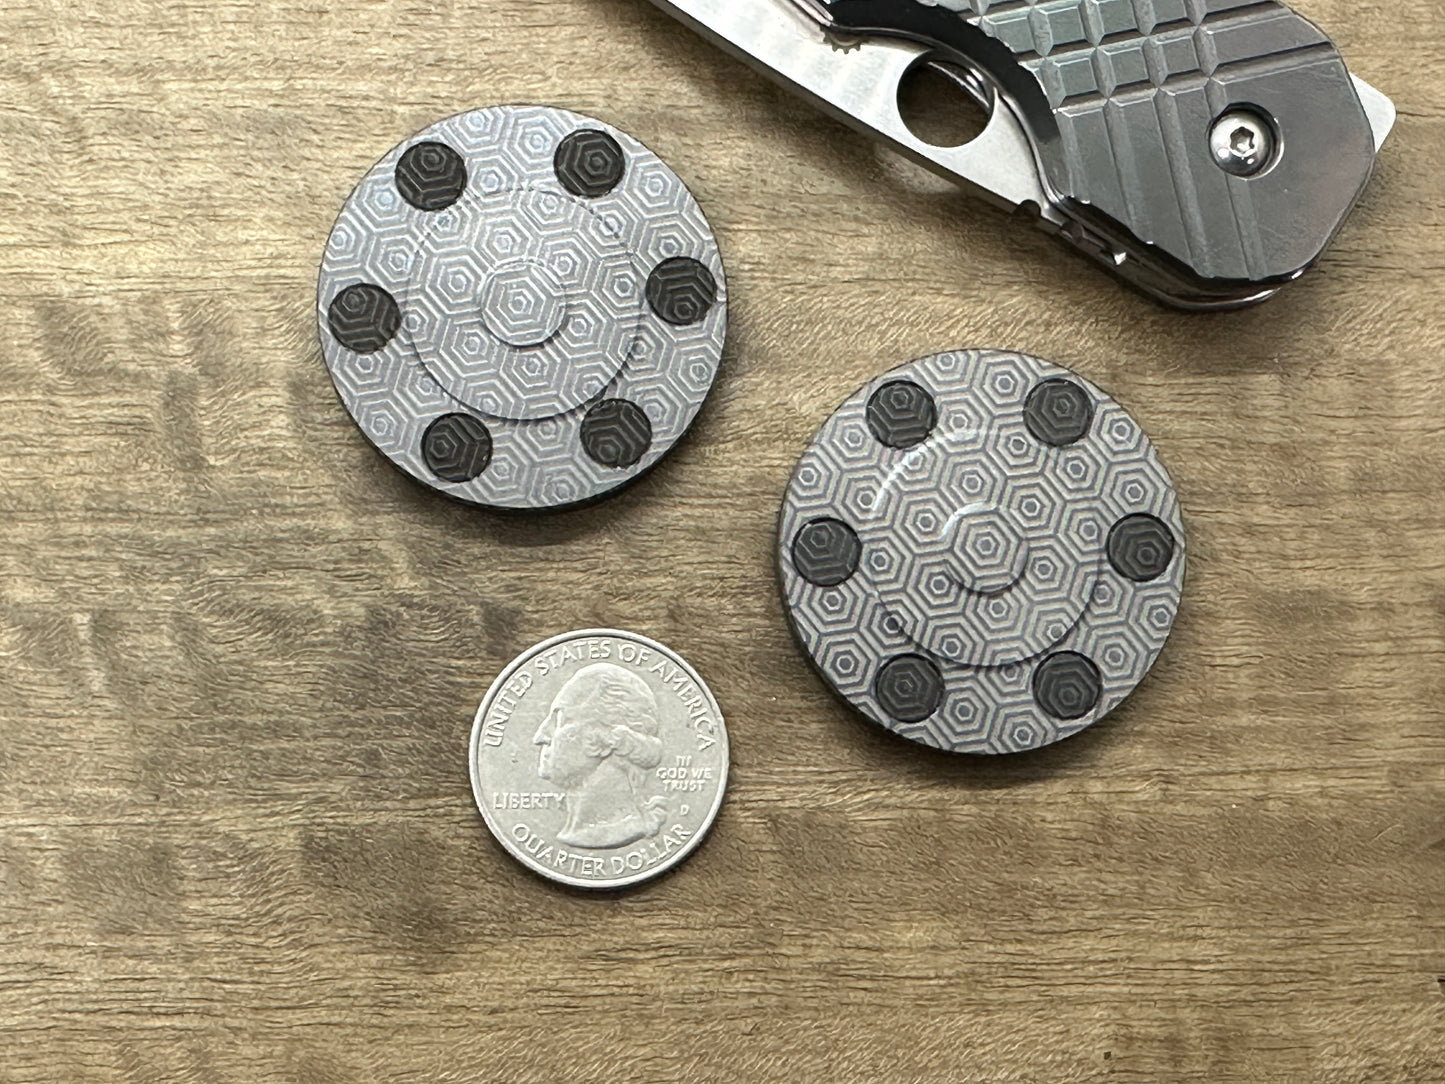 Rebel Alliance vs Imperial Galactic Black Tungsten HAPTIC Coins CLICKY Haptic